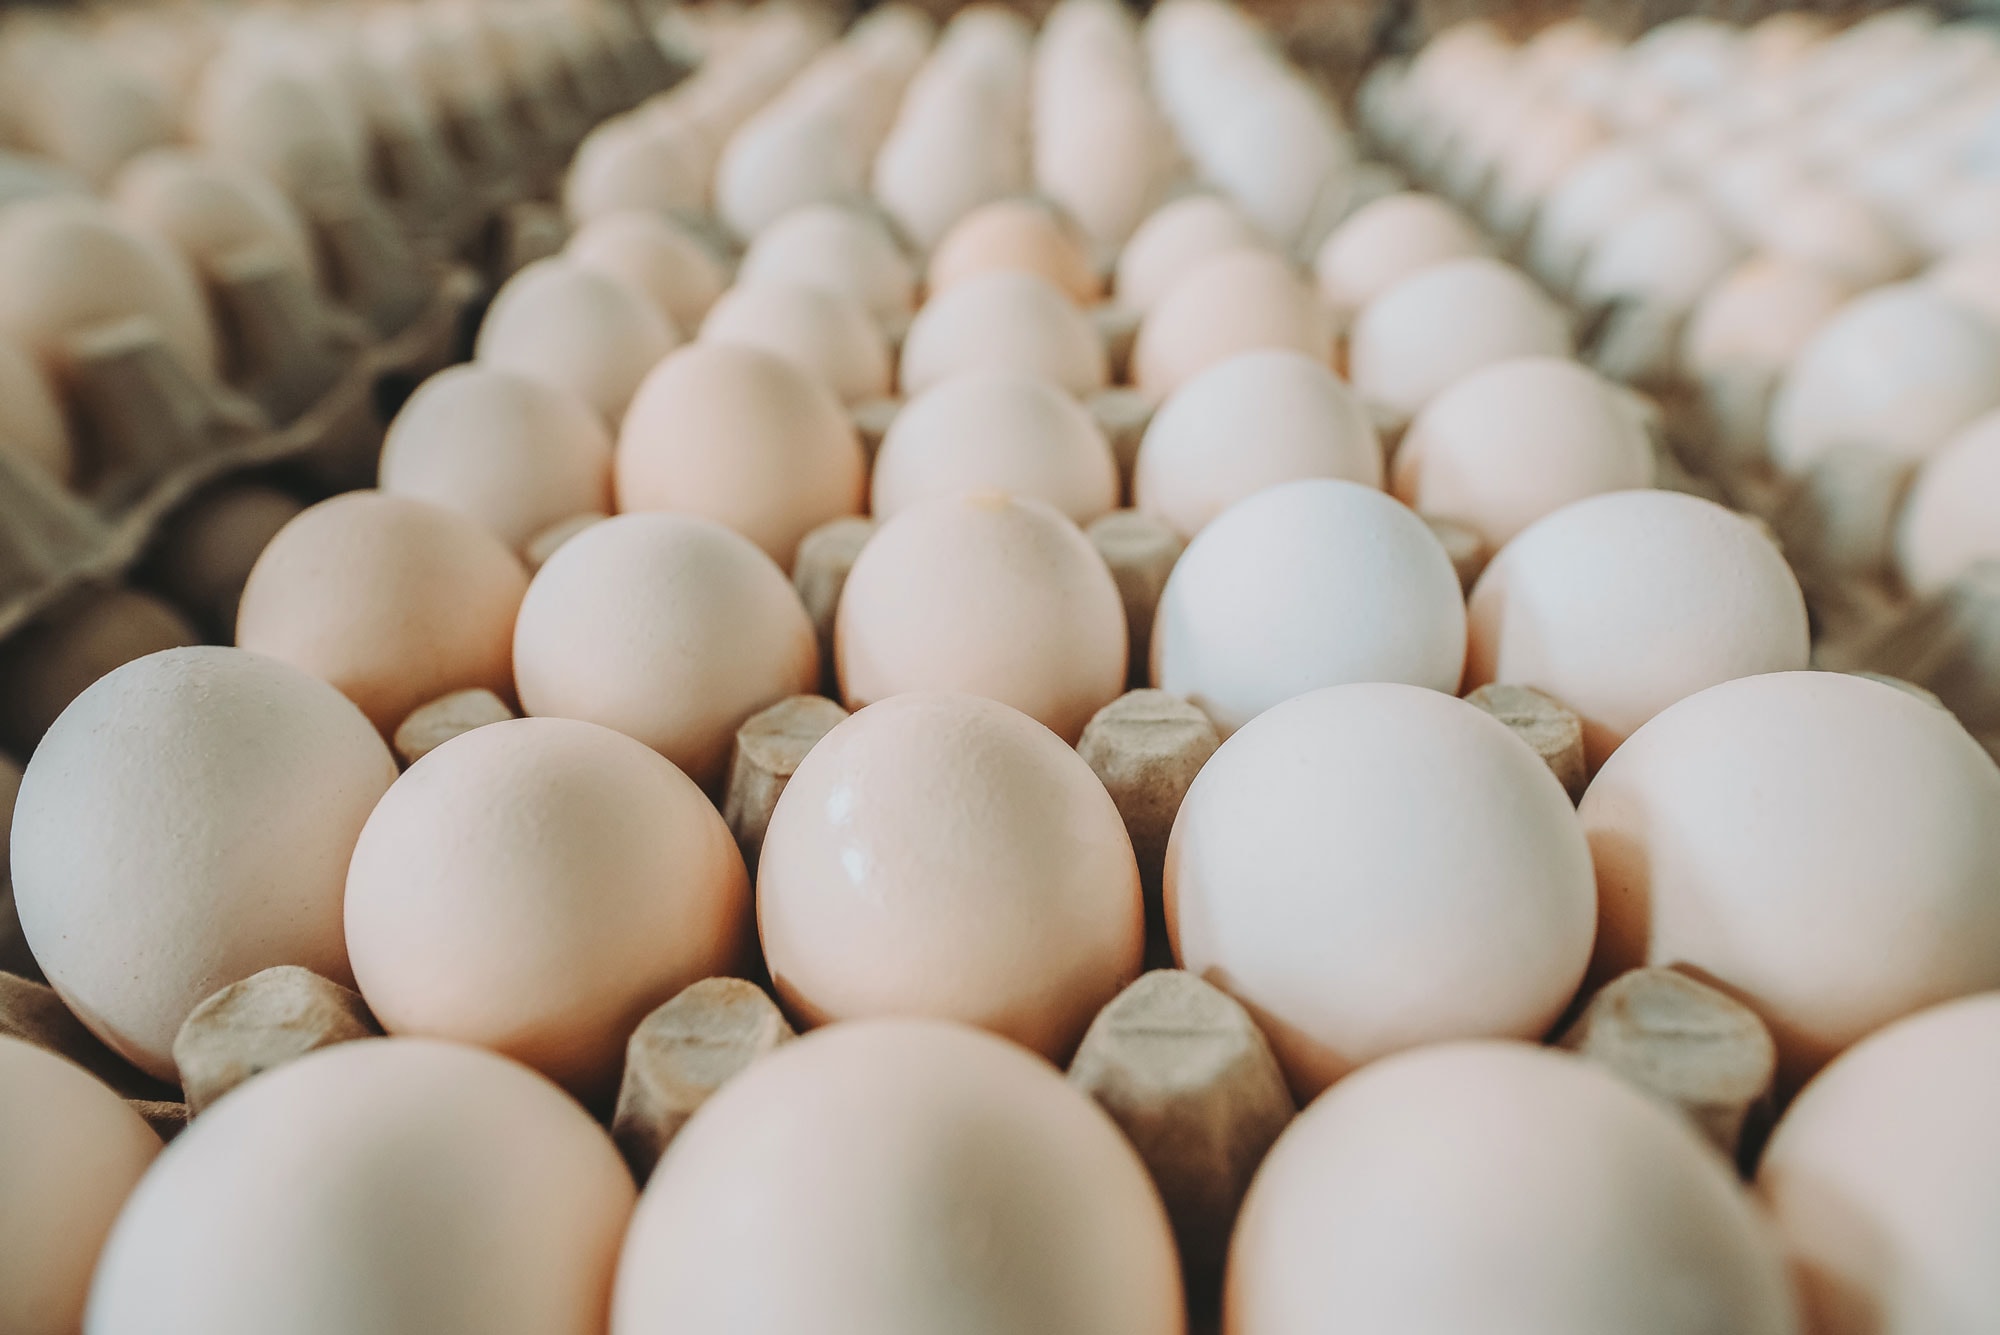 Rows and rows of white eggs in flat open cartons